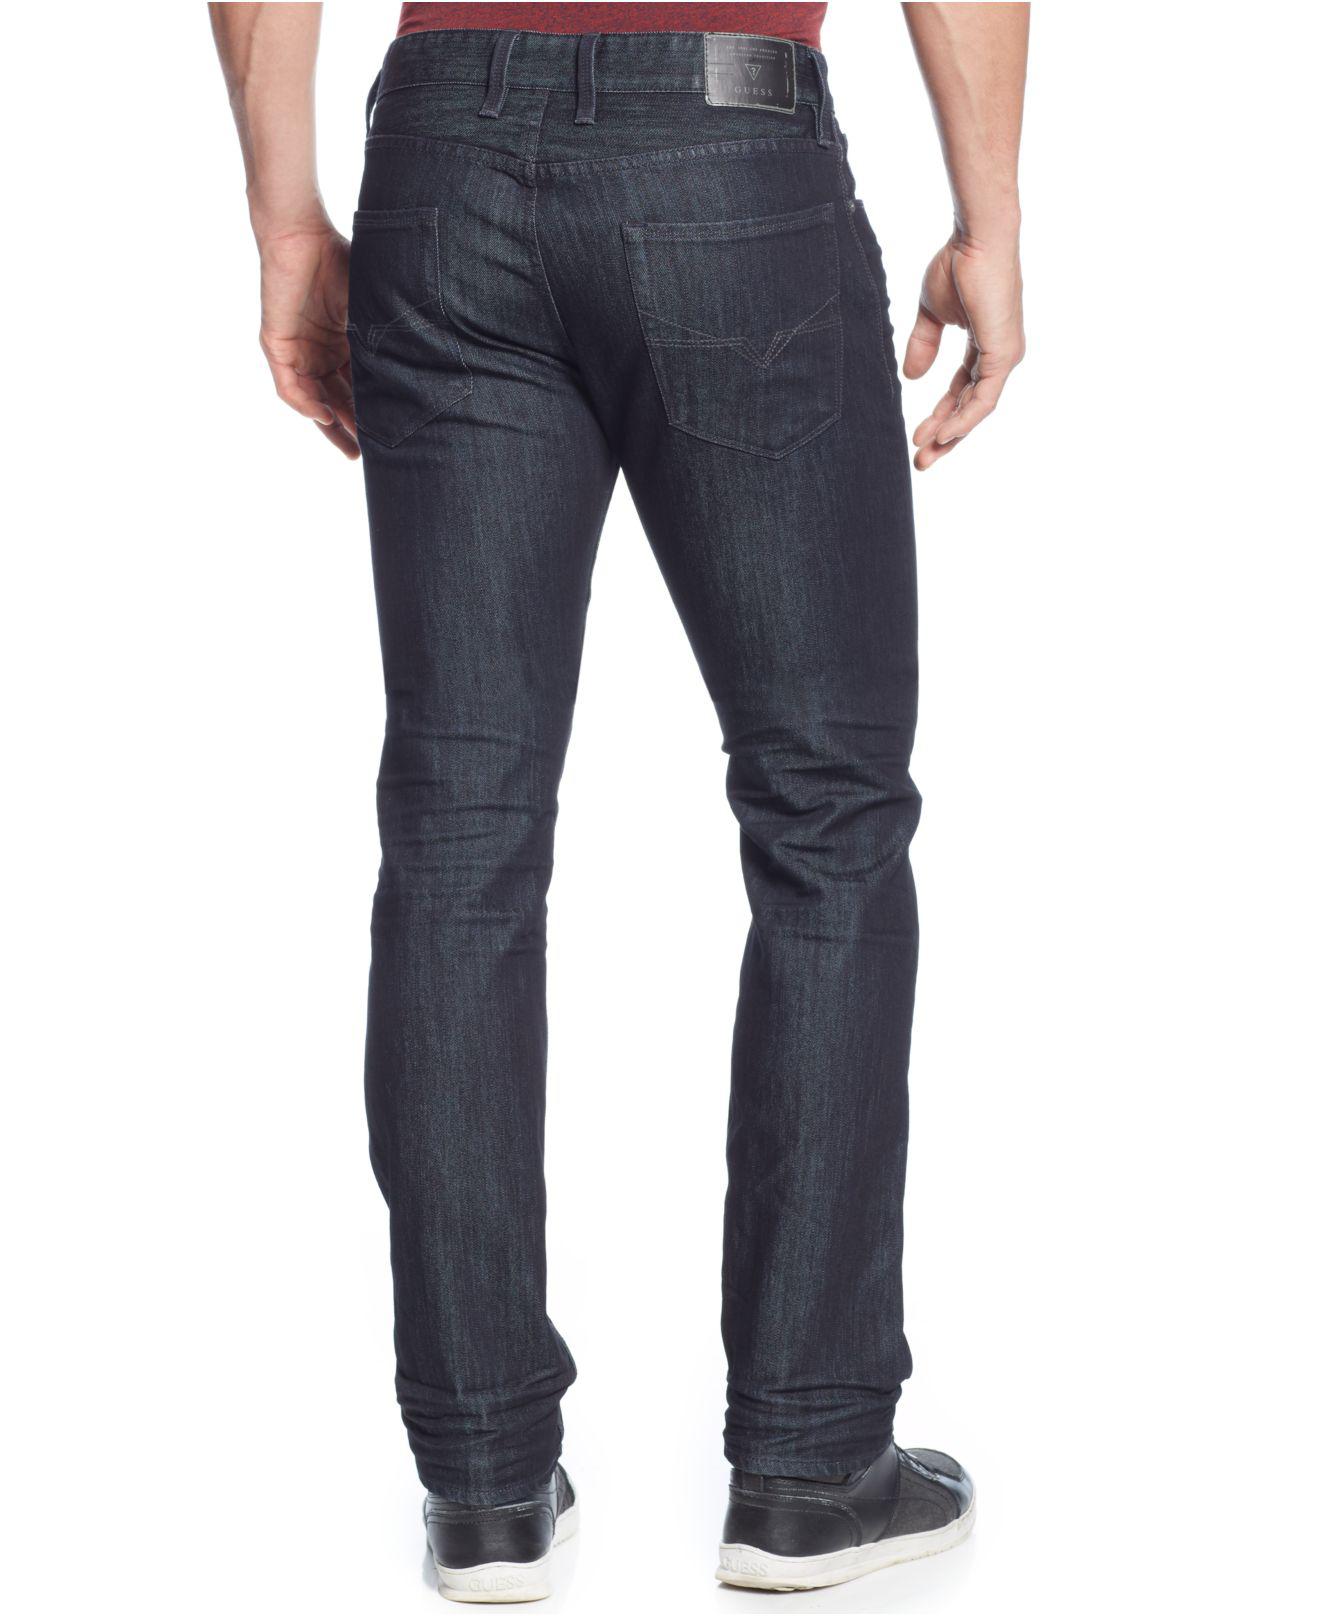 Guess Denim Slim-straight Smokescreen-wash Jeans in Blue for Men - Lyst